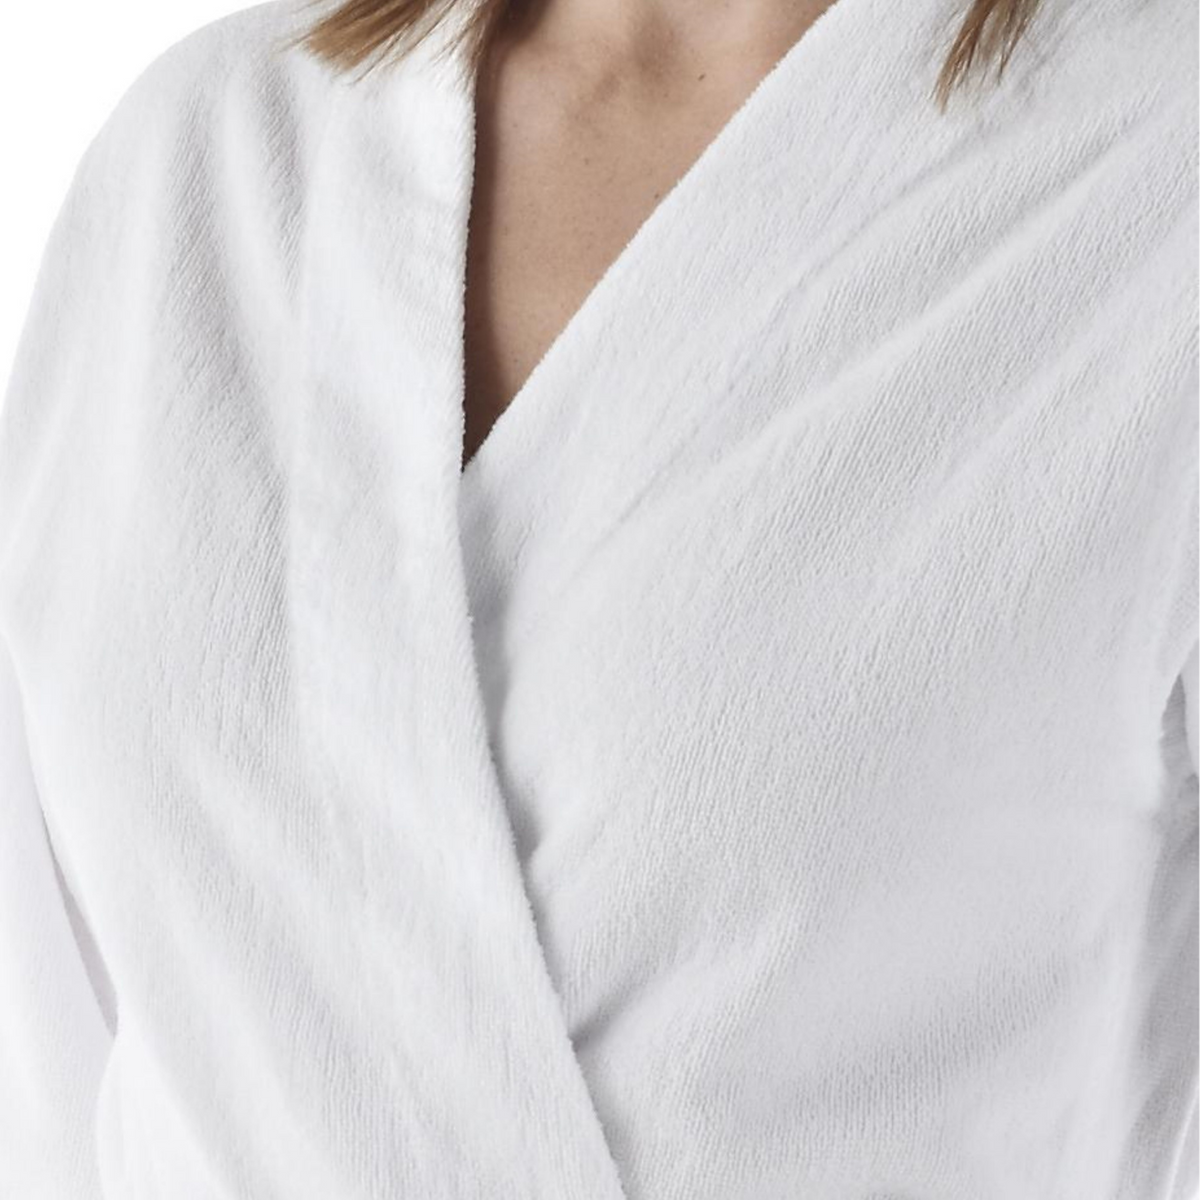 Abyss Spa Bath Robes and Slippers White Fine Linens